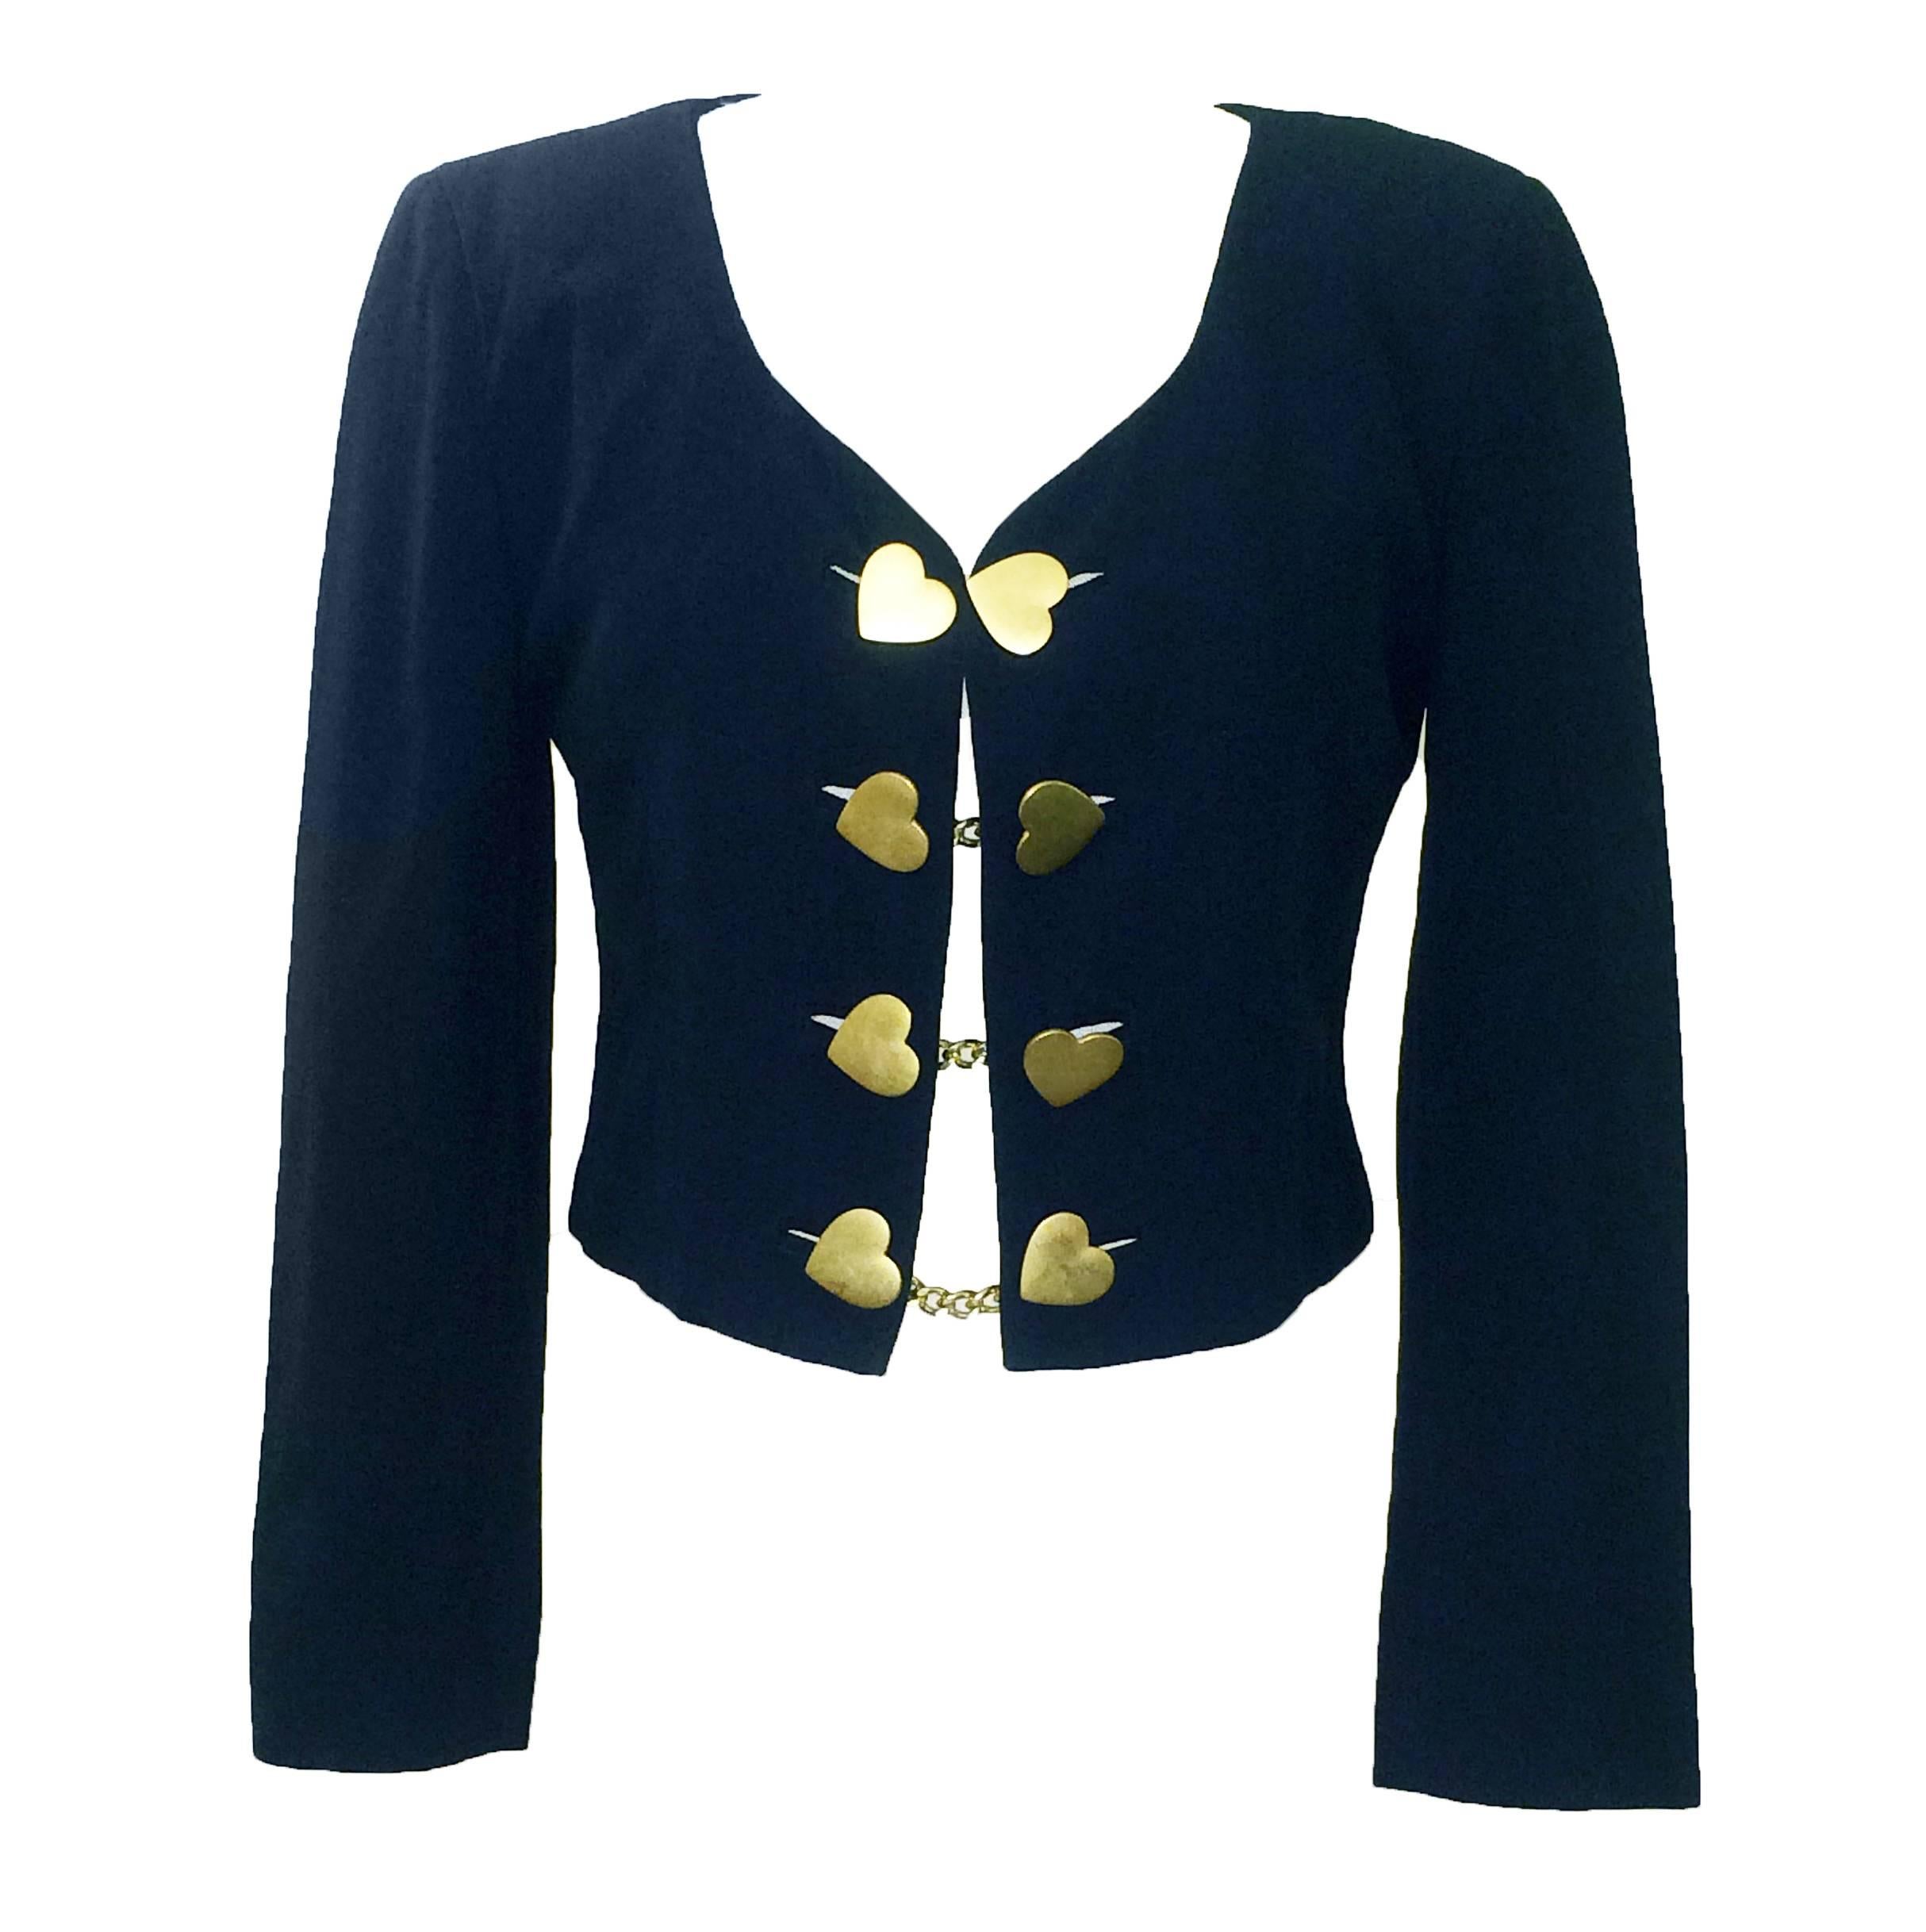 Moschino Couture! Cruise Me Baby 1980's 'Love Boat' jacket with heart chain buttons at front by Franco Moschino. Love boat embroidery at back features sailboat with Italian flag at mast.

Made in Italy.

55% acetate, 45% rayon. 
Fully lined in